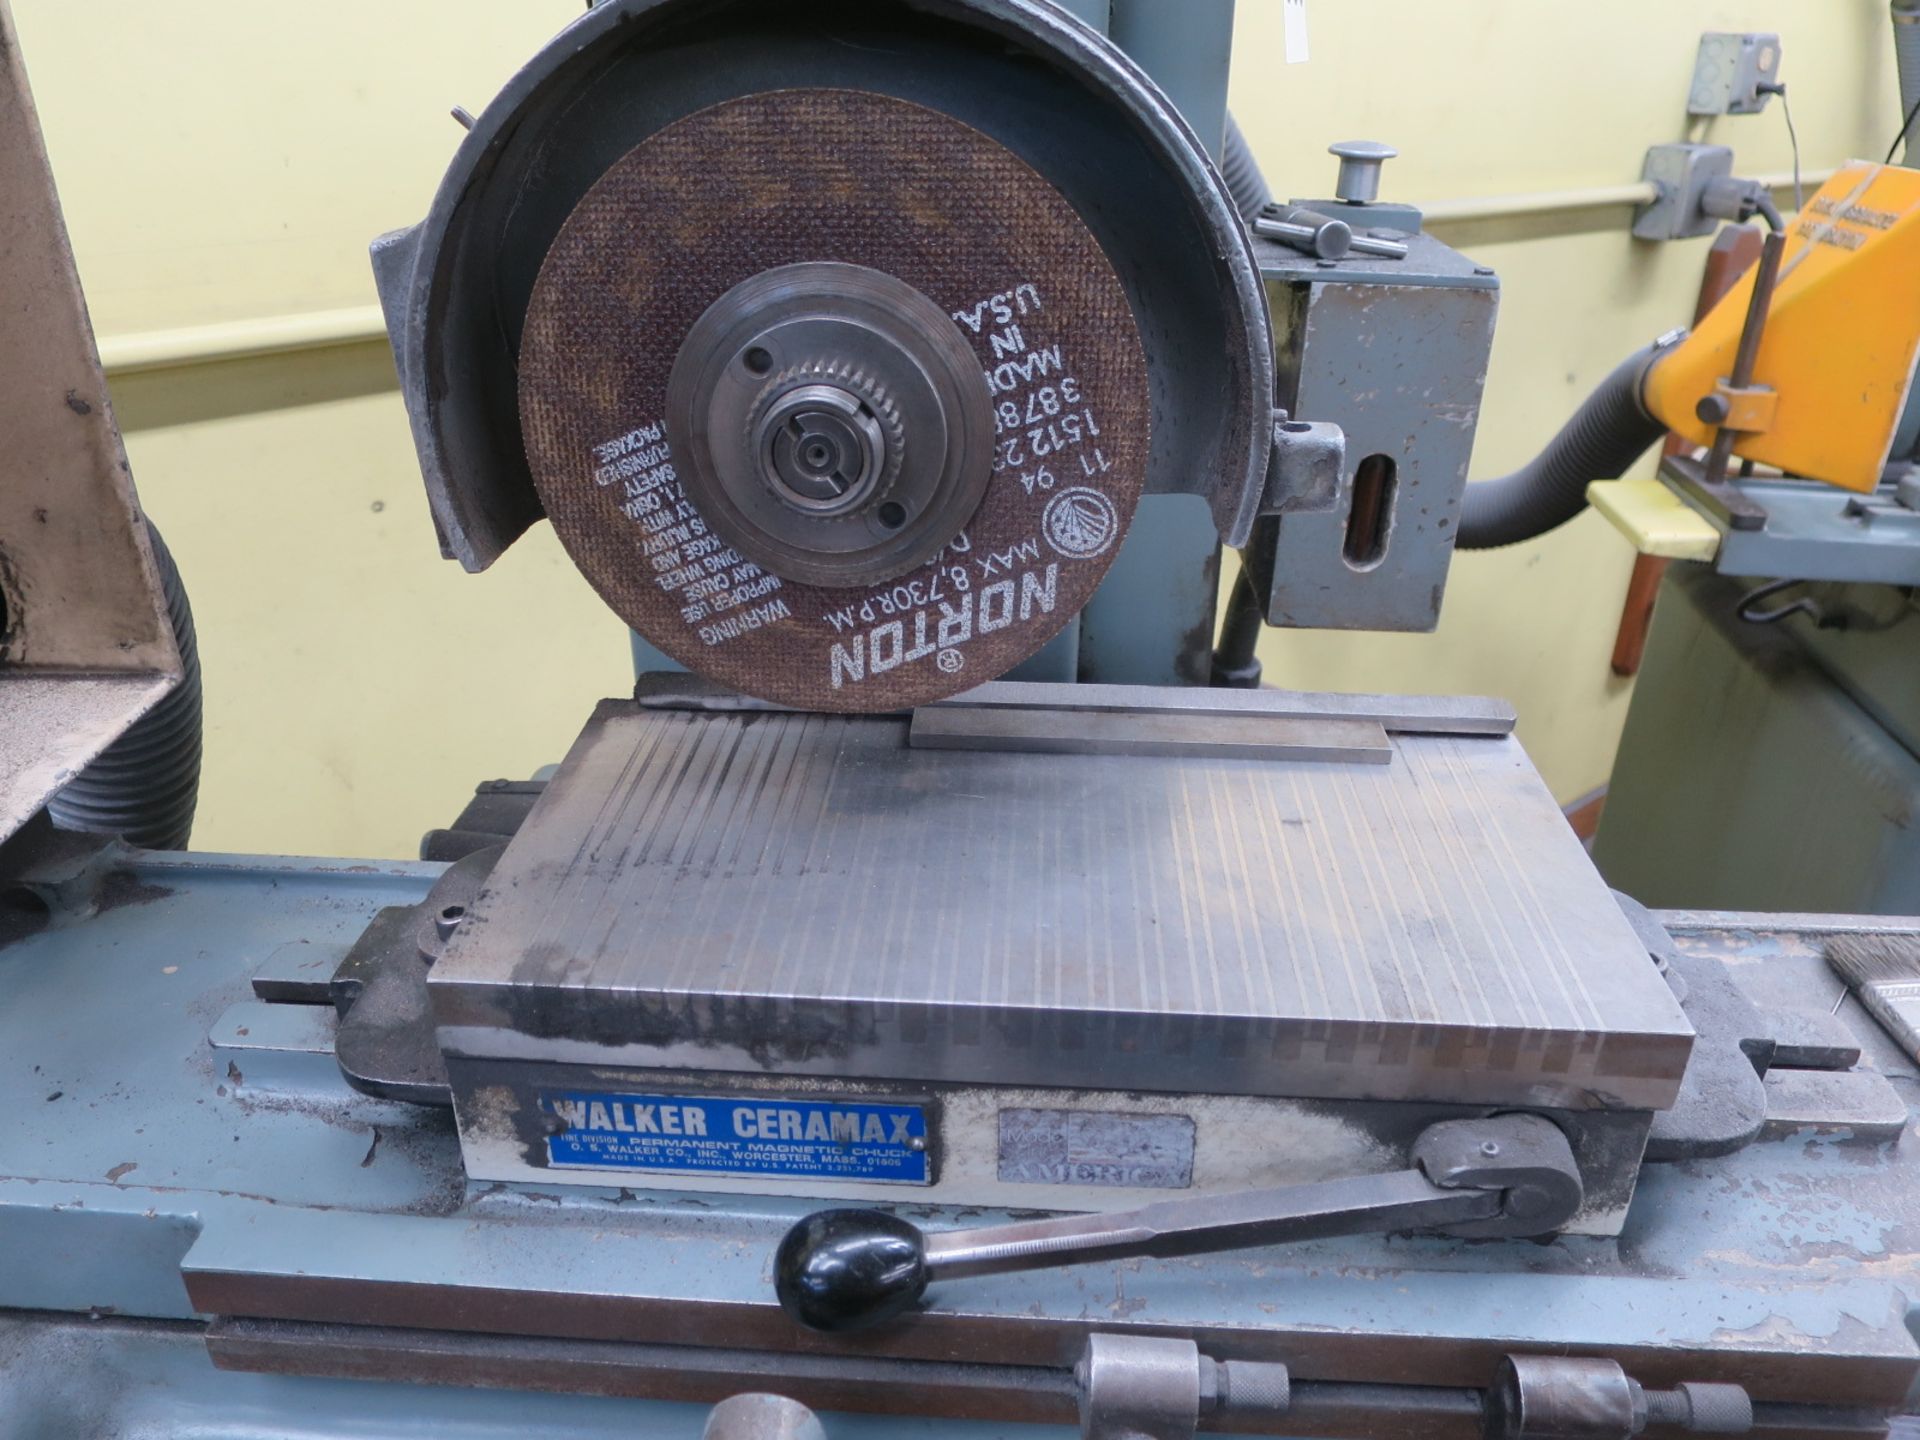 Boyar Schultz H612 Surface Grinder, Sn 22794 With Walker Ceramax Magnetic Chuck Table Size: - Image 3 of 3